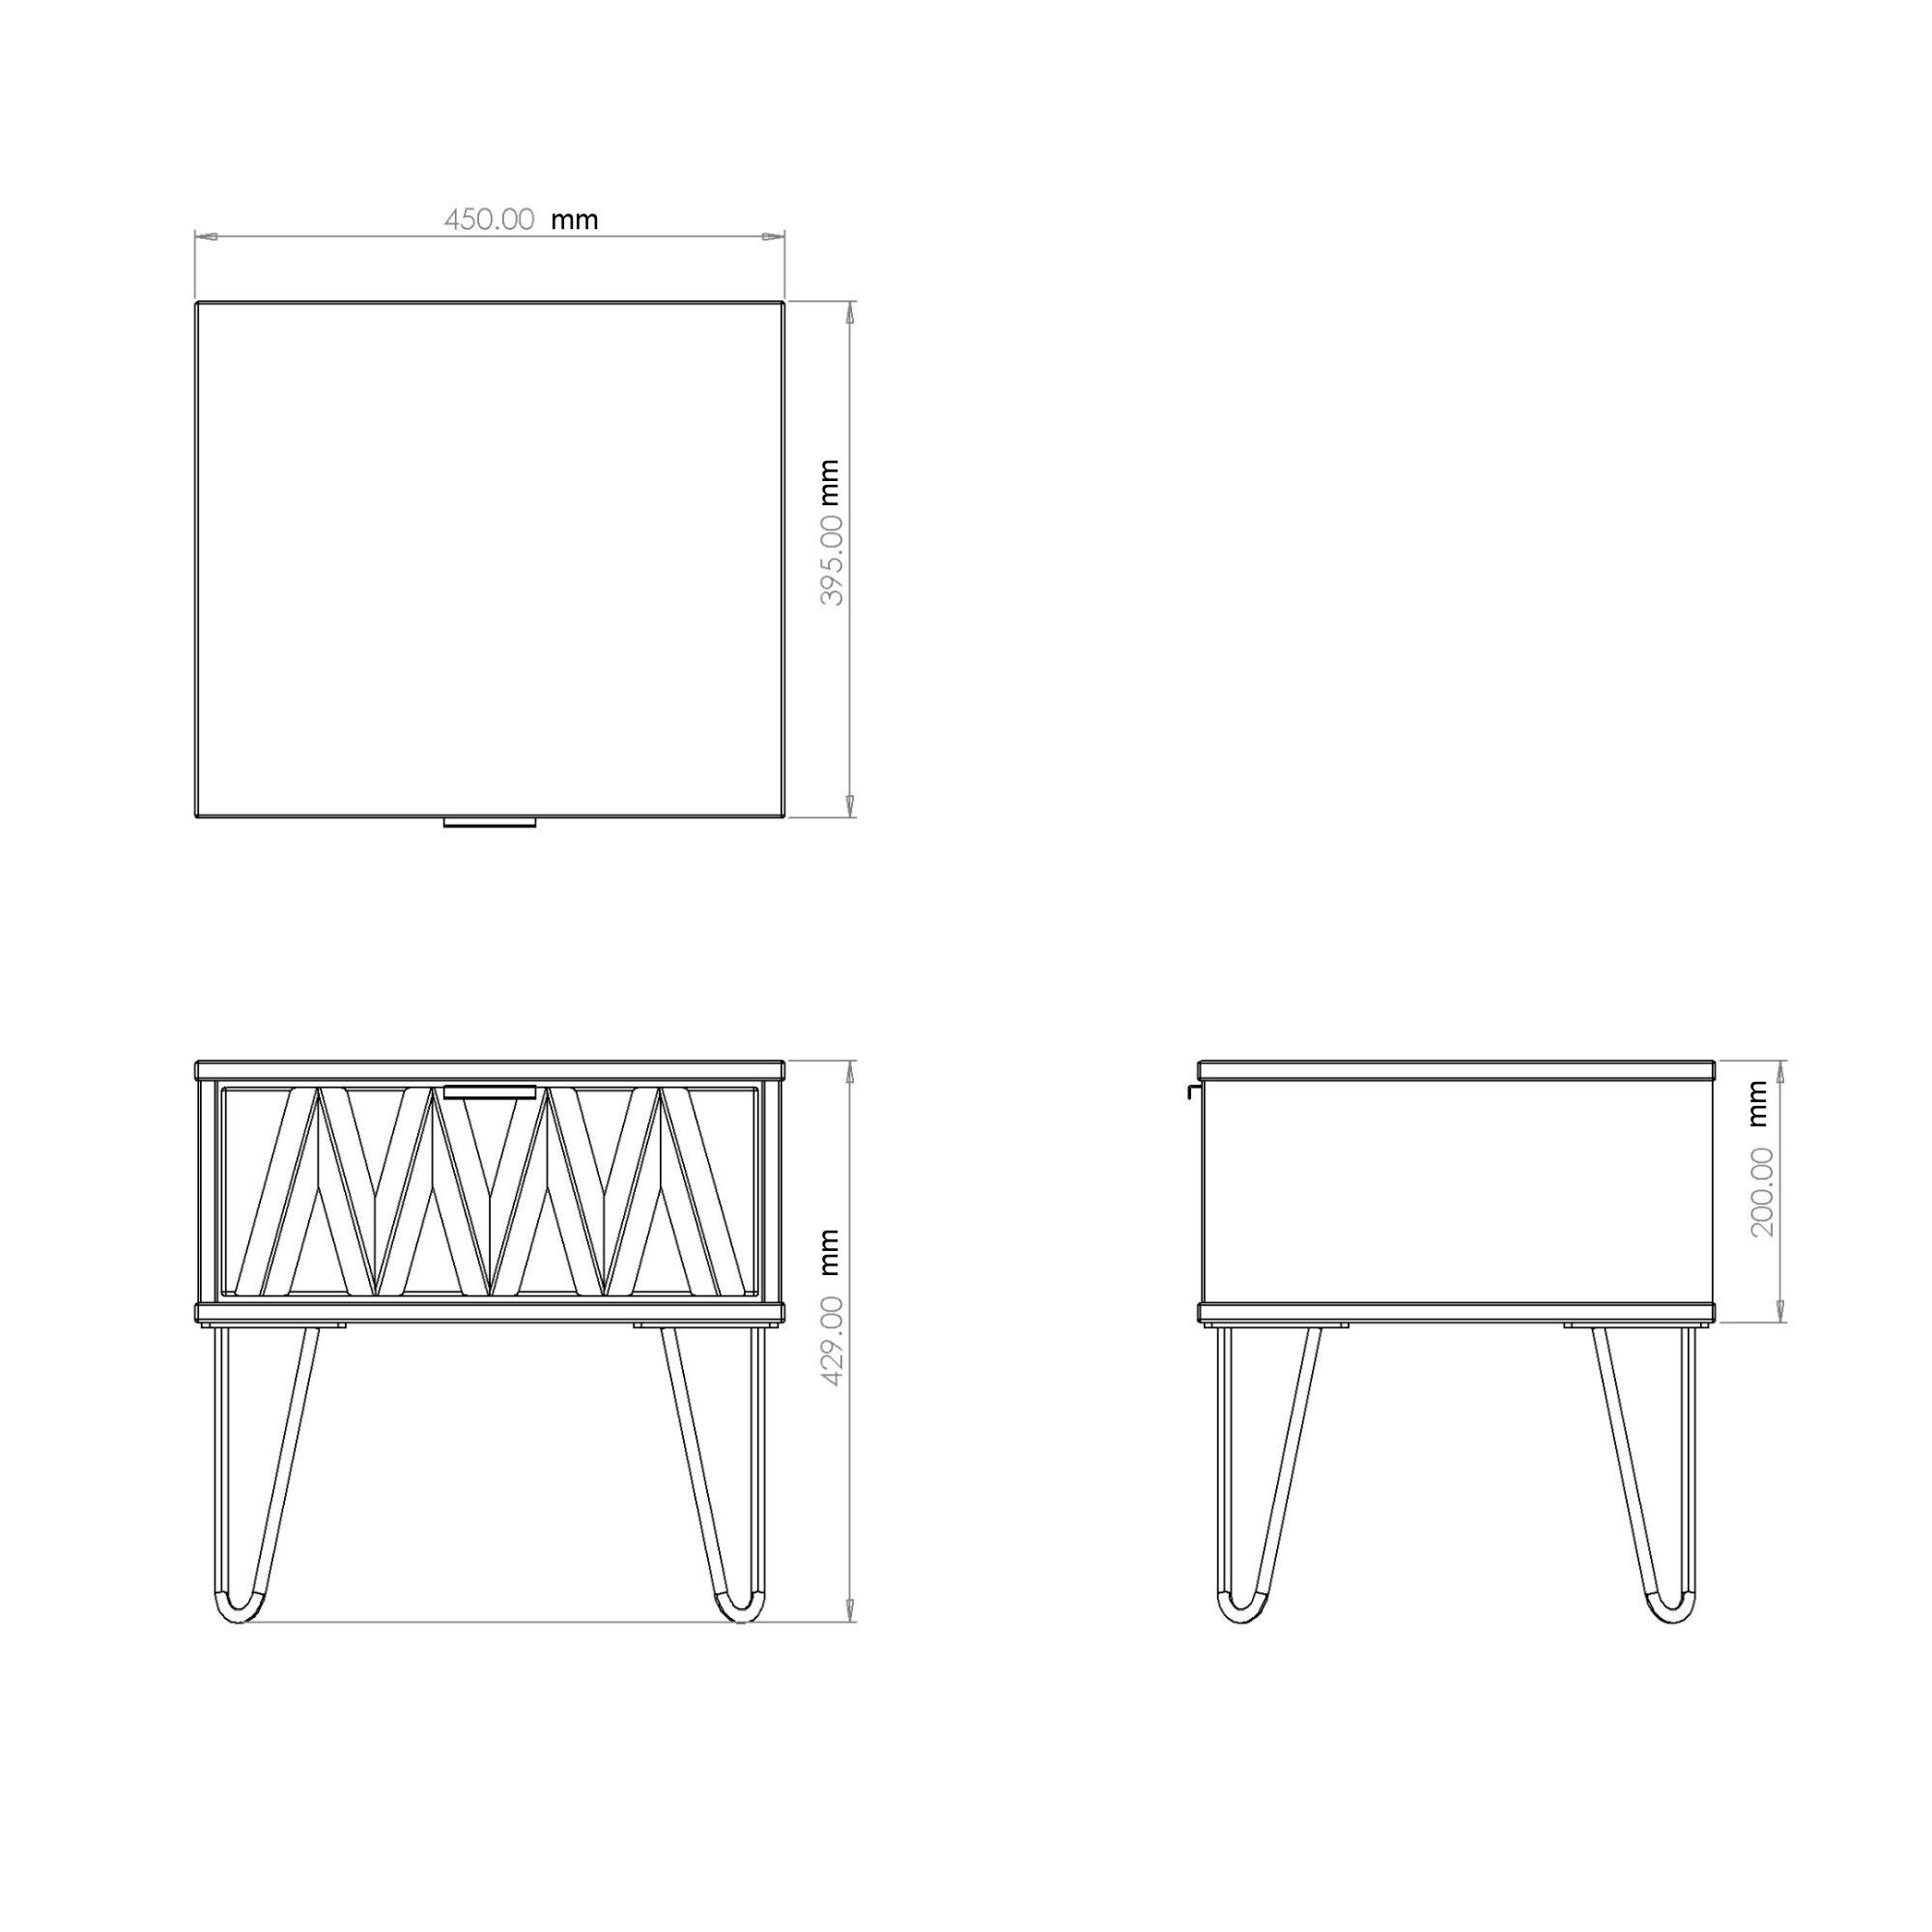 Linear Ready assembled Matt white 1 Drawer Small Side table (H)410mm (W)450mm (D)395mm